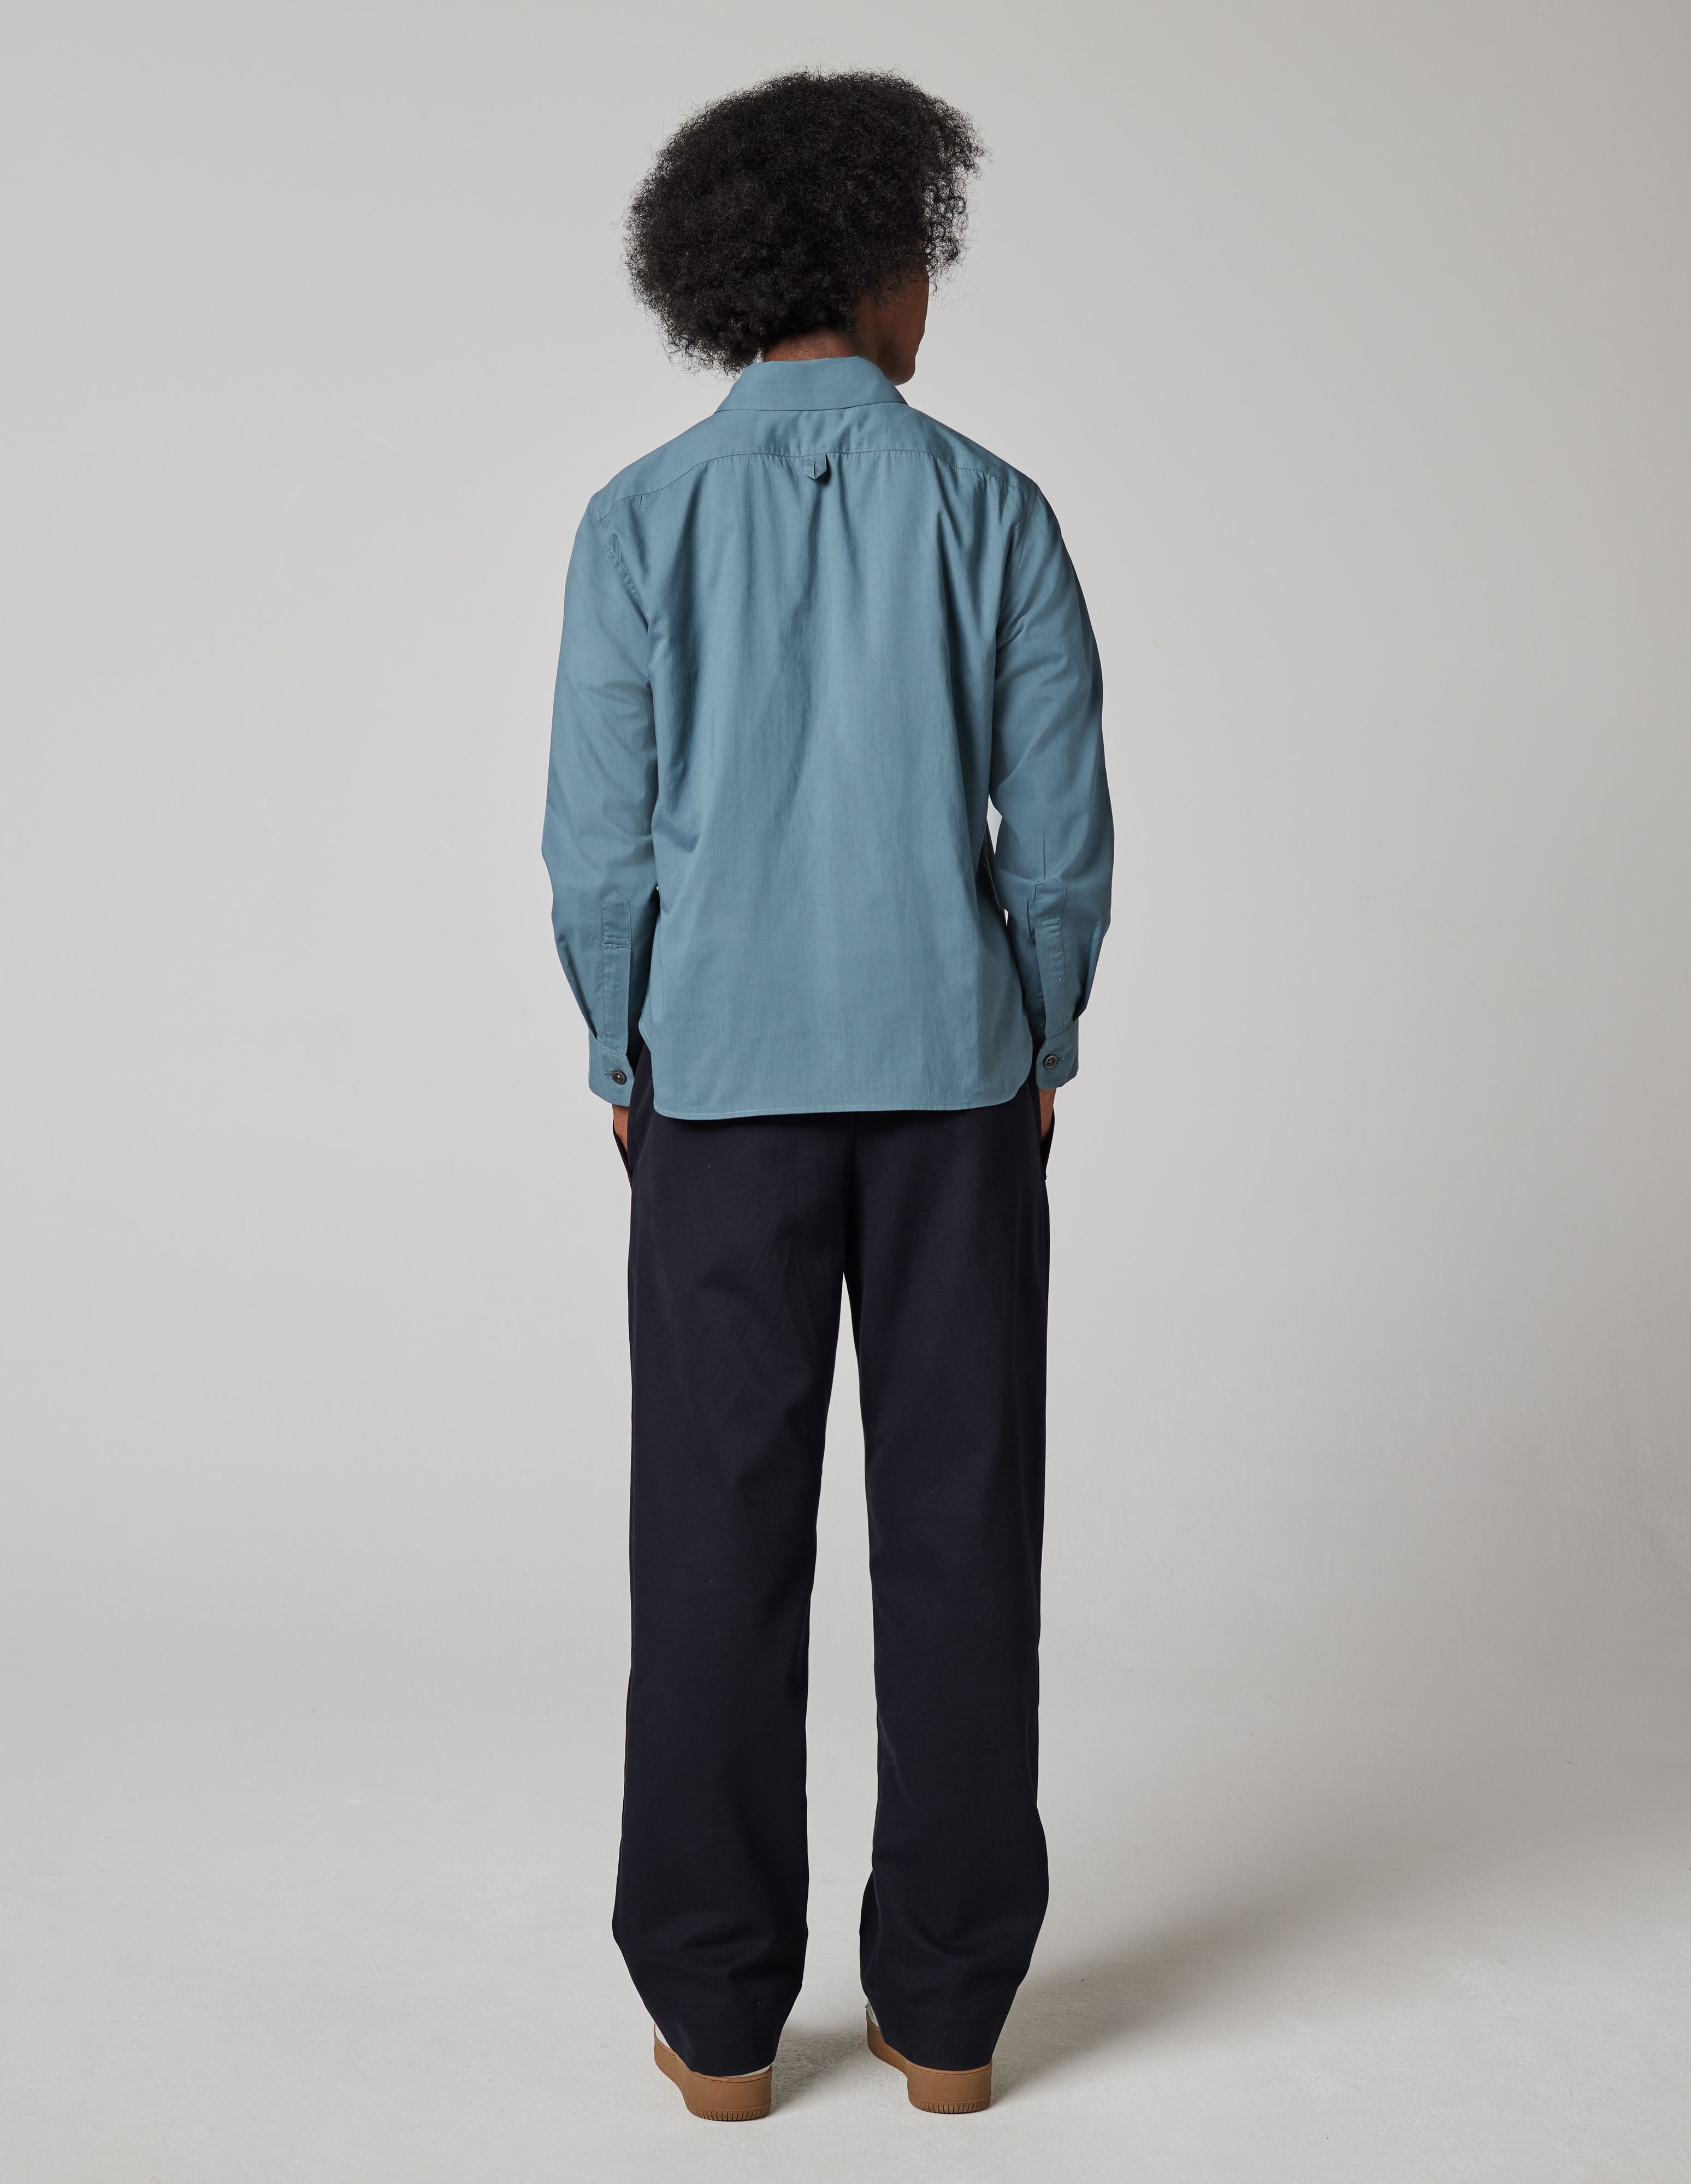 MARGARET HOWELL - Dusty blue washed cotton simple shirt | Margaret Howell